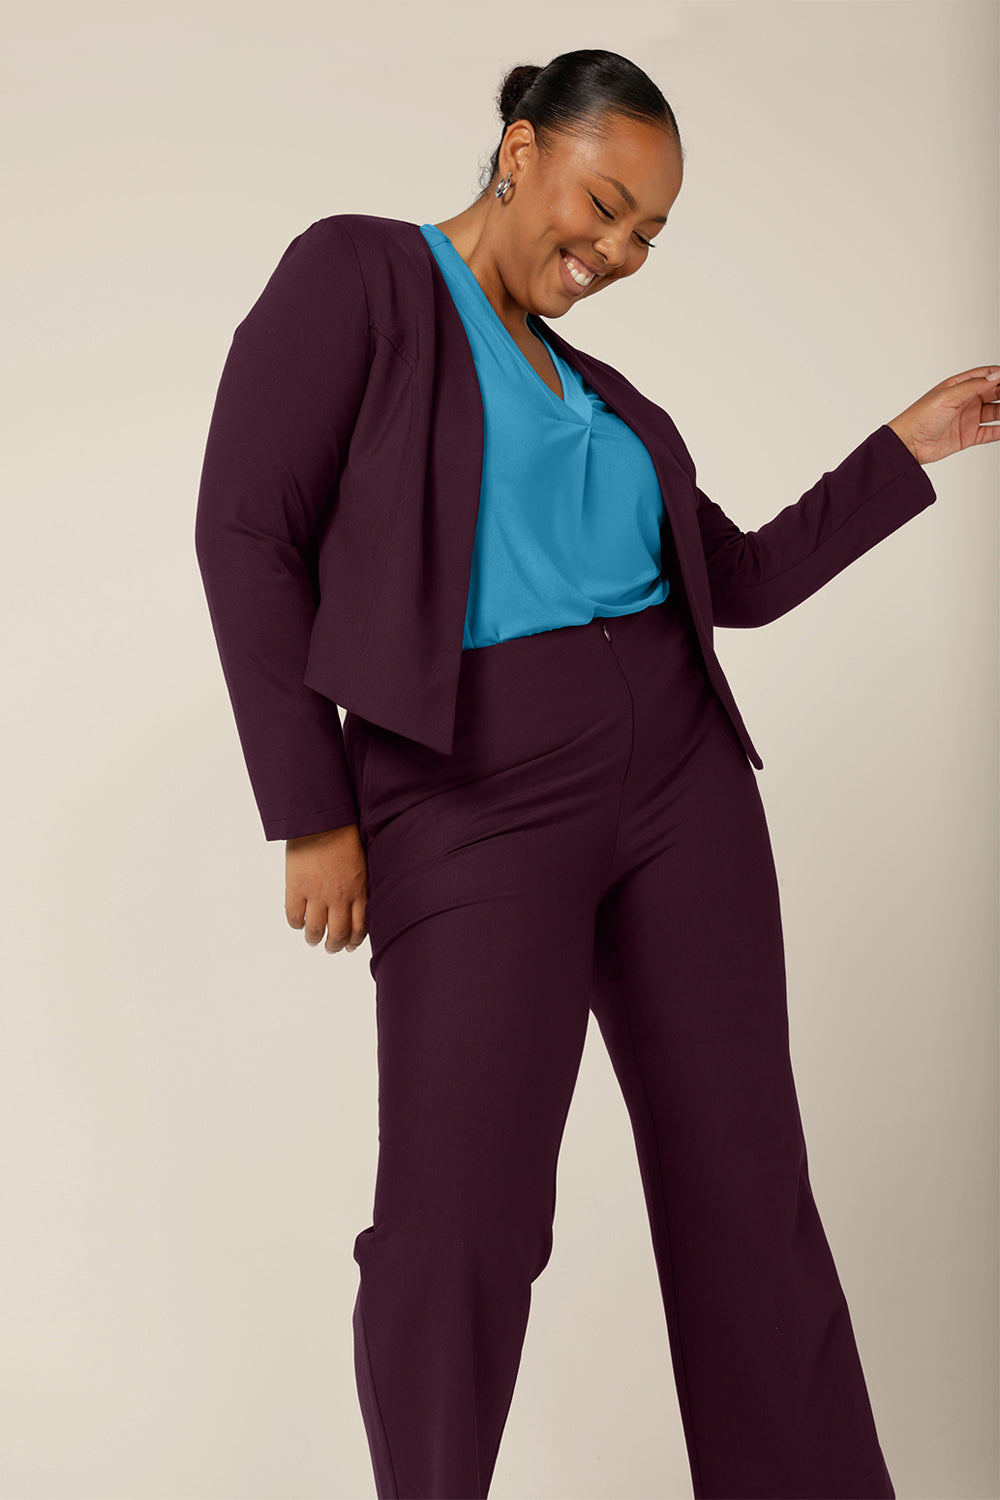 A good work jacket for plus size women, the Mackenzie Jacket in Mulberry is available to shop in sizes 8 to 24. Made in Australia by Australian and New Zealand womenswear brand, L&F, this work jacket is a collarless and open fronted with long sleeves and an angled hem. This corporate jacket is worn with slim leg pants and a V-neck top in opal blue..